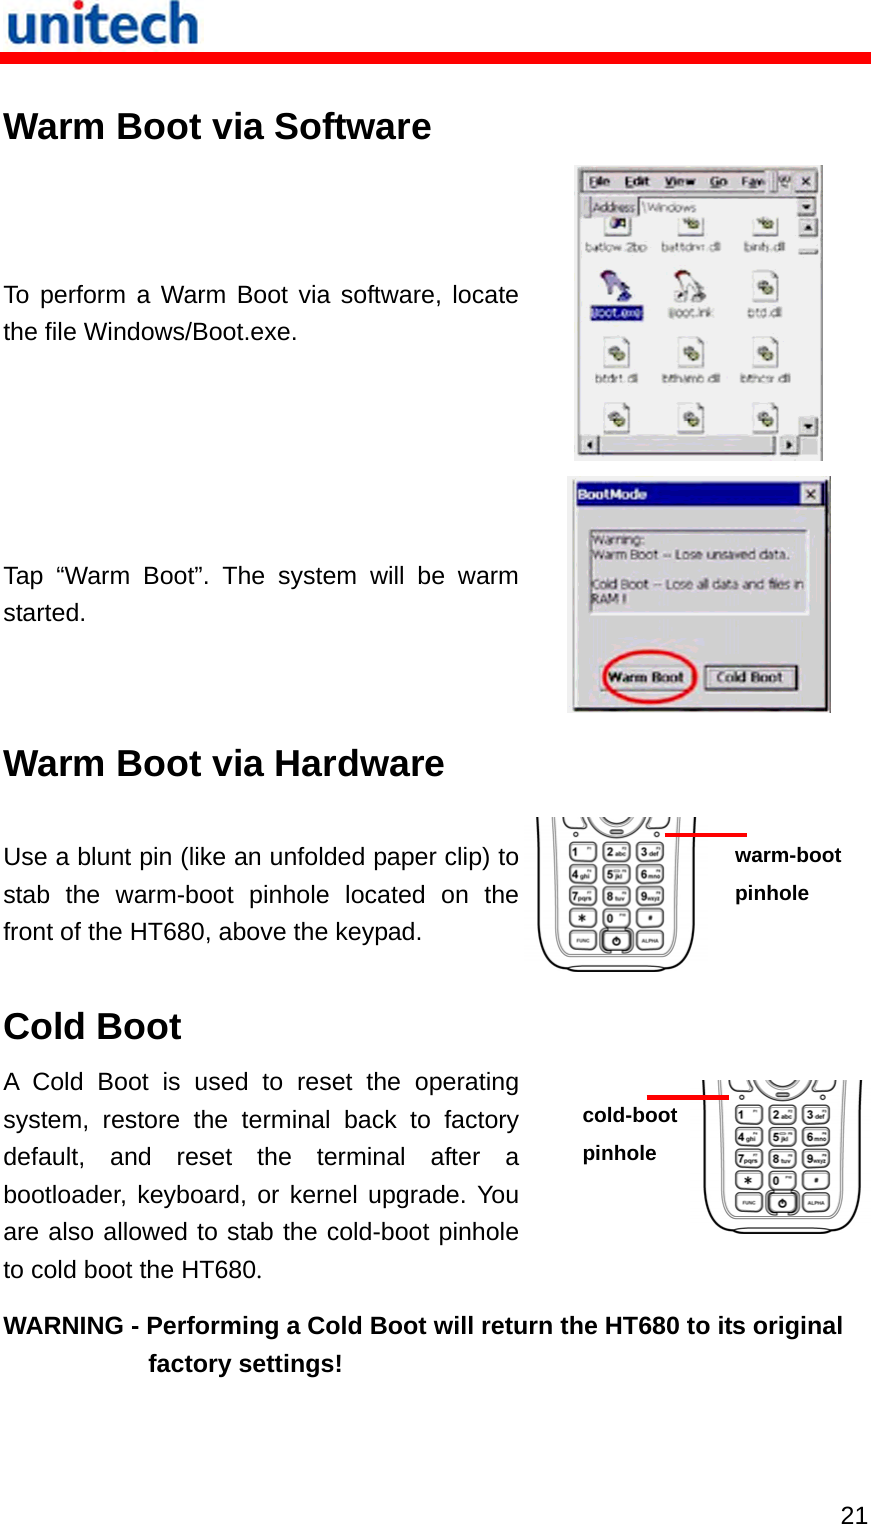   21 Warm Boot via Software To perform a Warm Boot via software, locate the file Windows/Boot.exe.  Tap “Warm Boot”. The system will be warm started.  Warm Boot via Hardware Use a blunt pin (like an unfolded paper clip) to stab the warm-boot pinhole located on the front of the HT680, above the keypad.   warm-boot pinhole Cold Boot A Cold Boot is used to reset the operating system, restore the terminal back to factory default, and reset the terminal after a bootloader, keyboard, or kernel upgrade. You are also allowed to stab the cold-boot pinhole to cold boot the HT680. cold-boot pinhole WARNING - Performing a Cold Boot will return the HT680 to its original factory settings! 